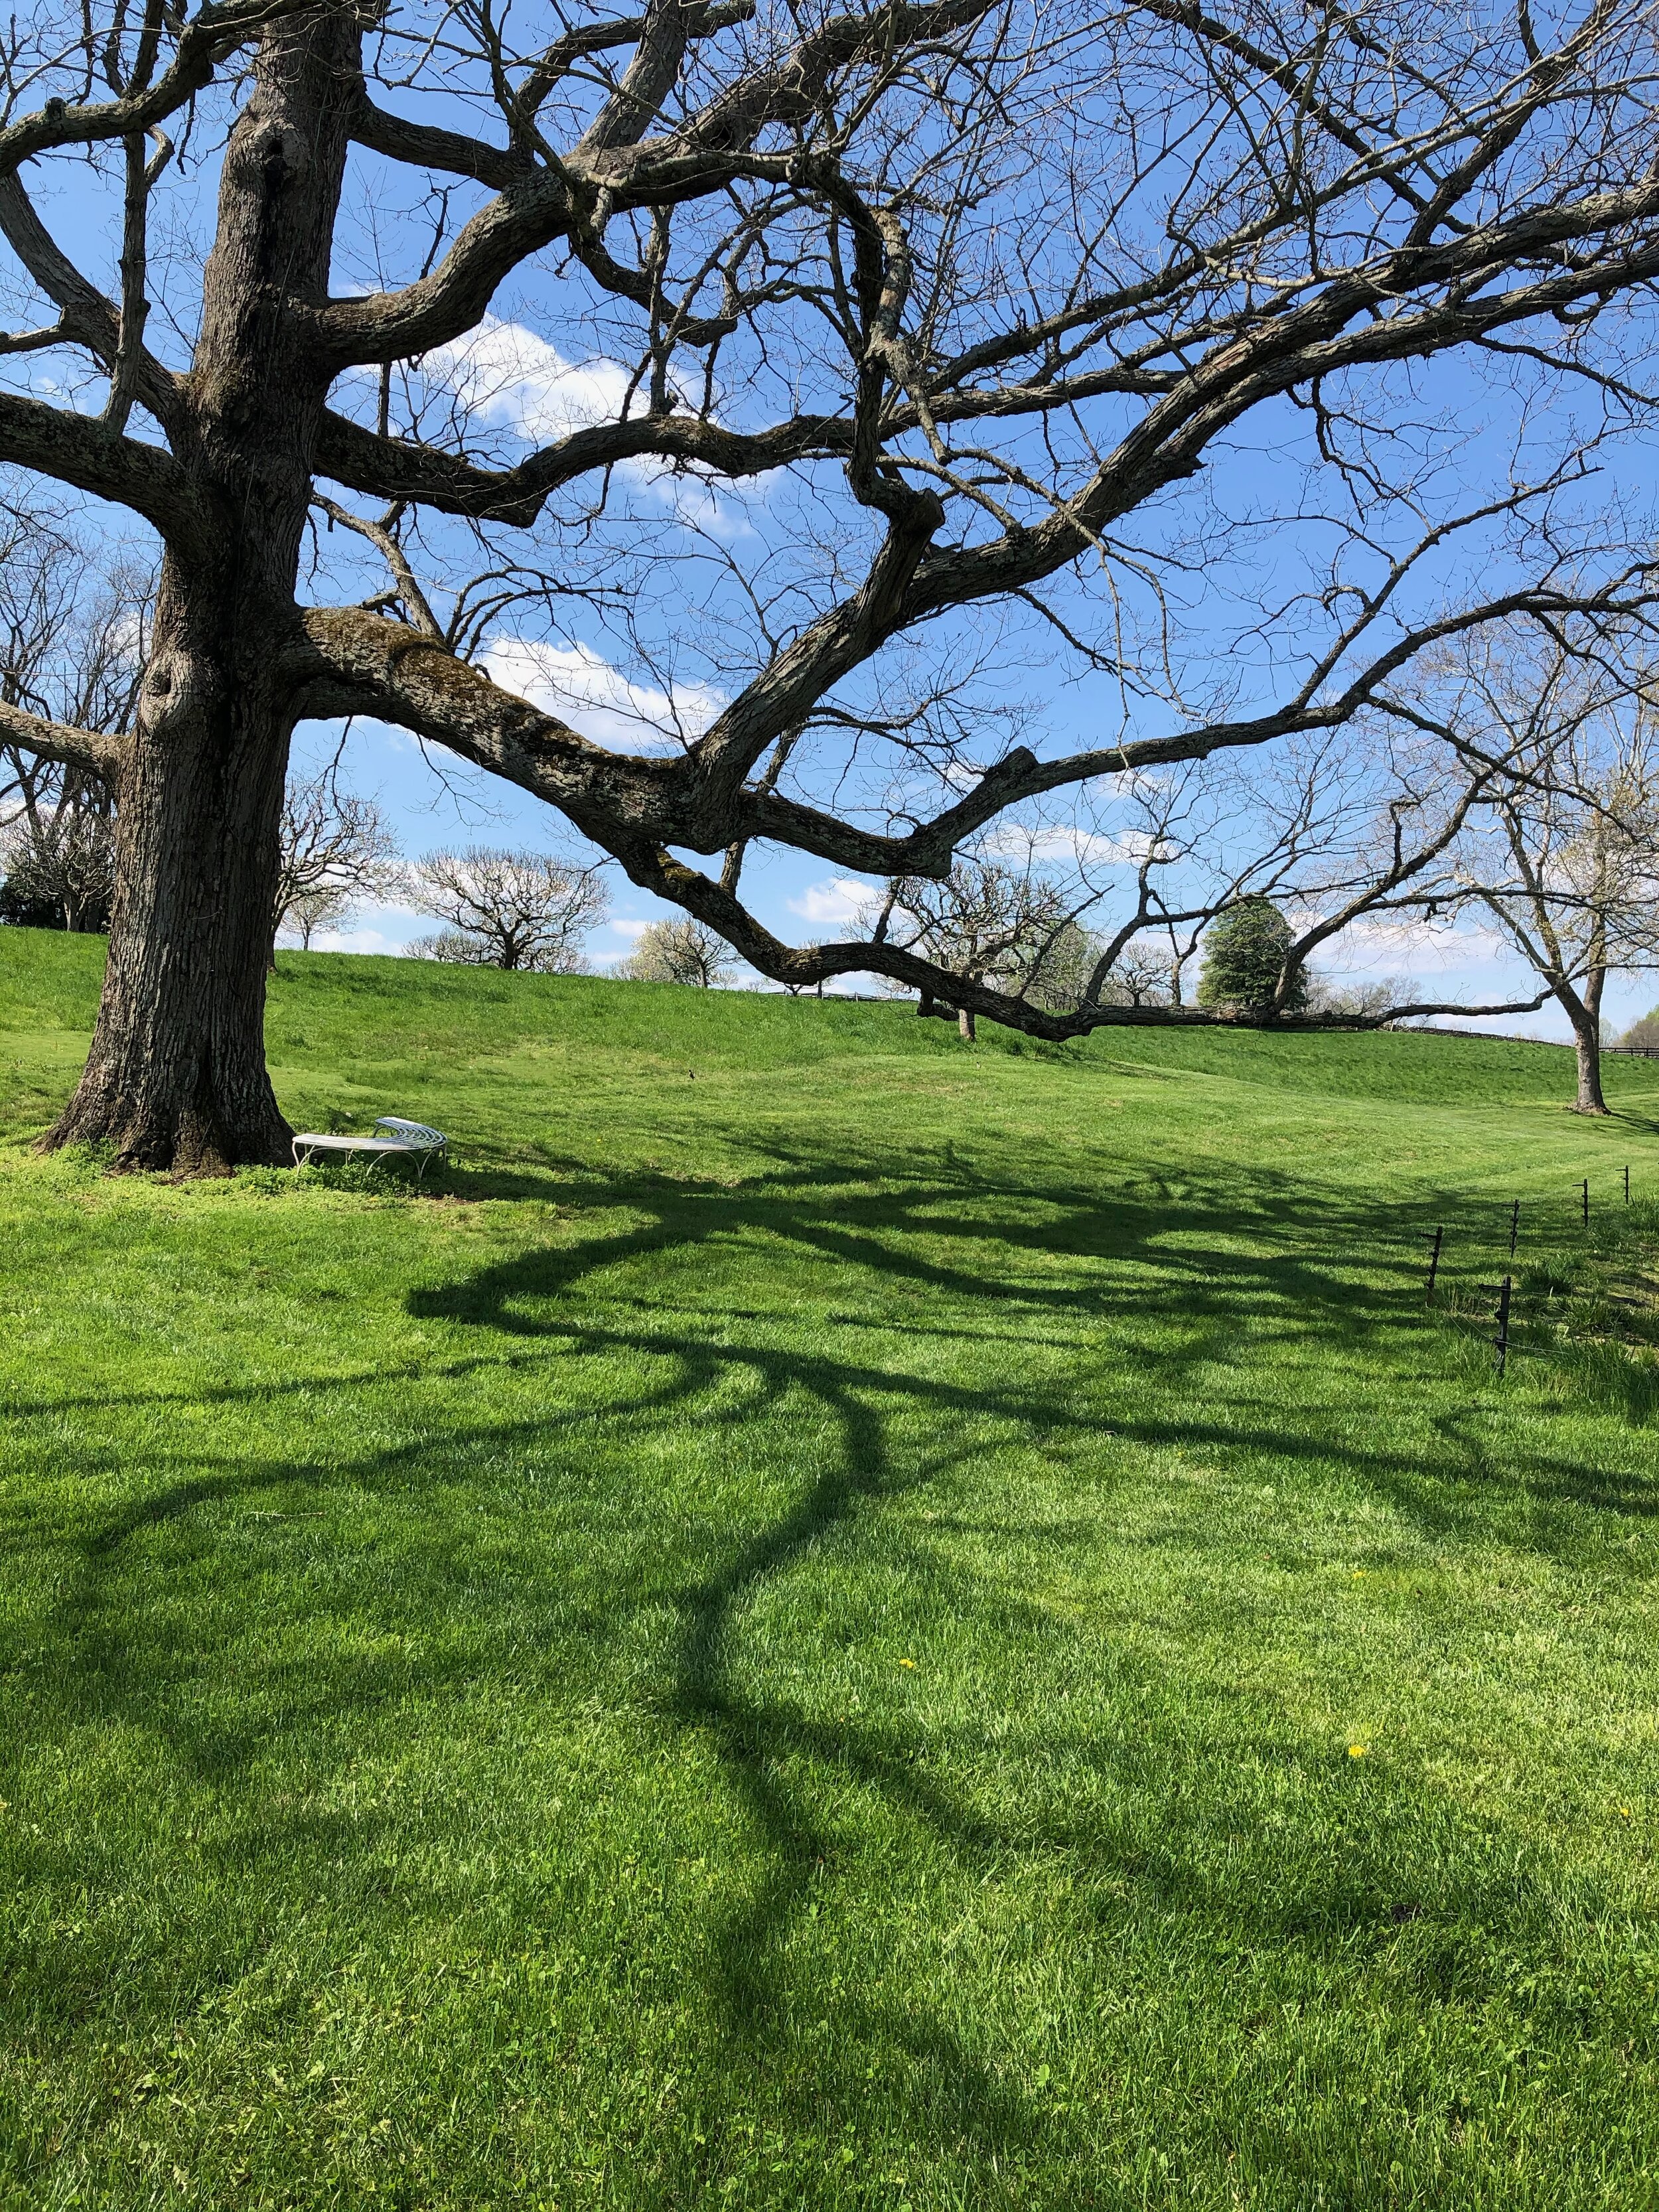  This stately 260 year old White Oak offers a quiet resting spot and casts lovely shadows on the lawn. 